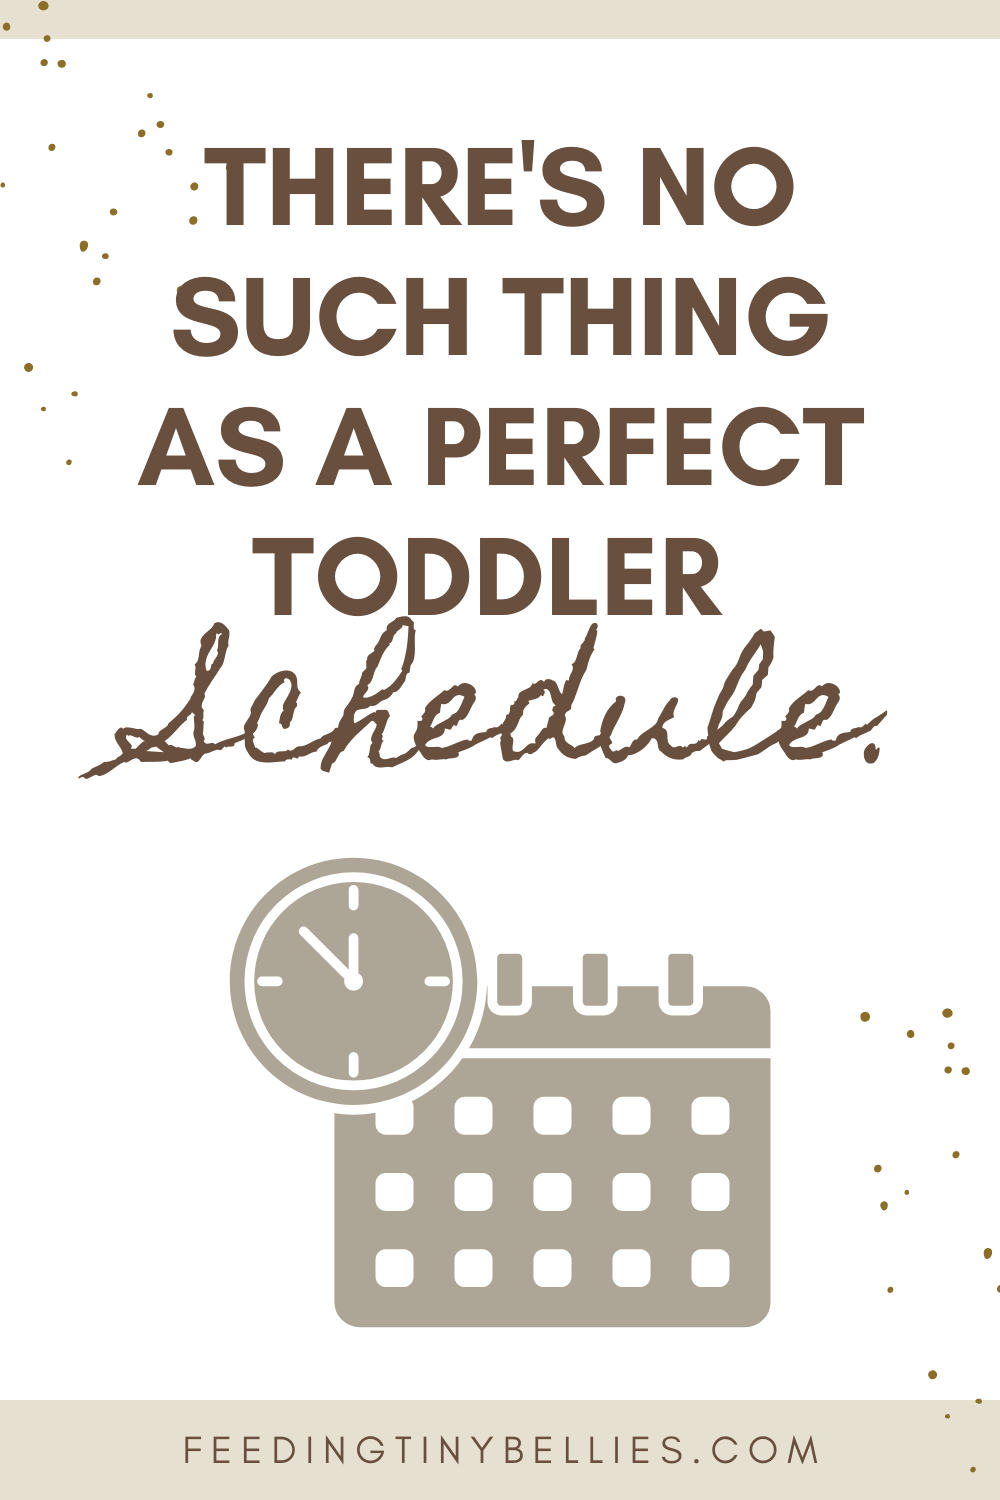 There's no such thing as a perfect toddler schedule.